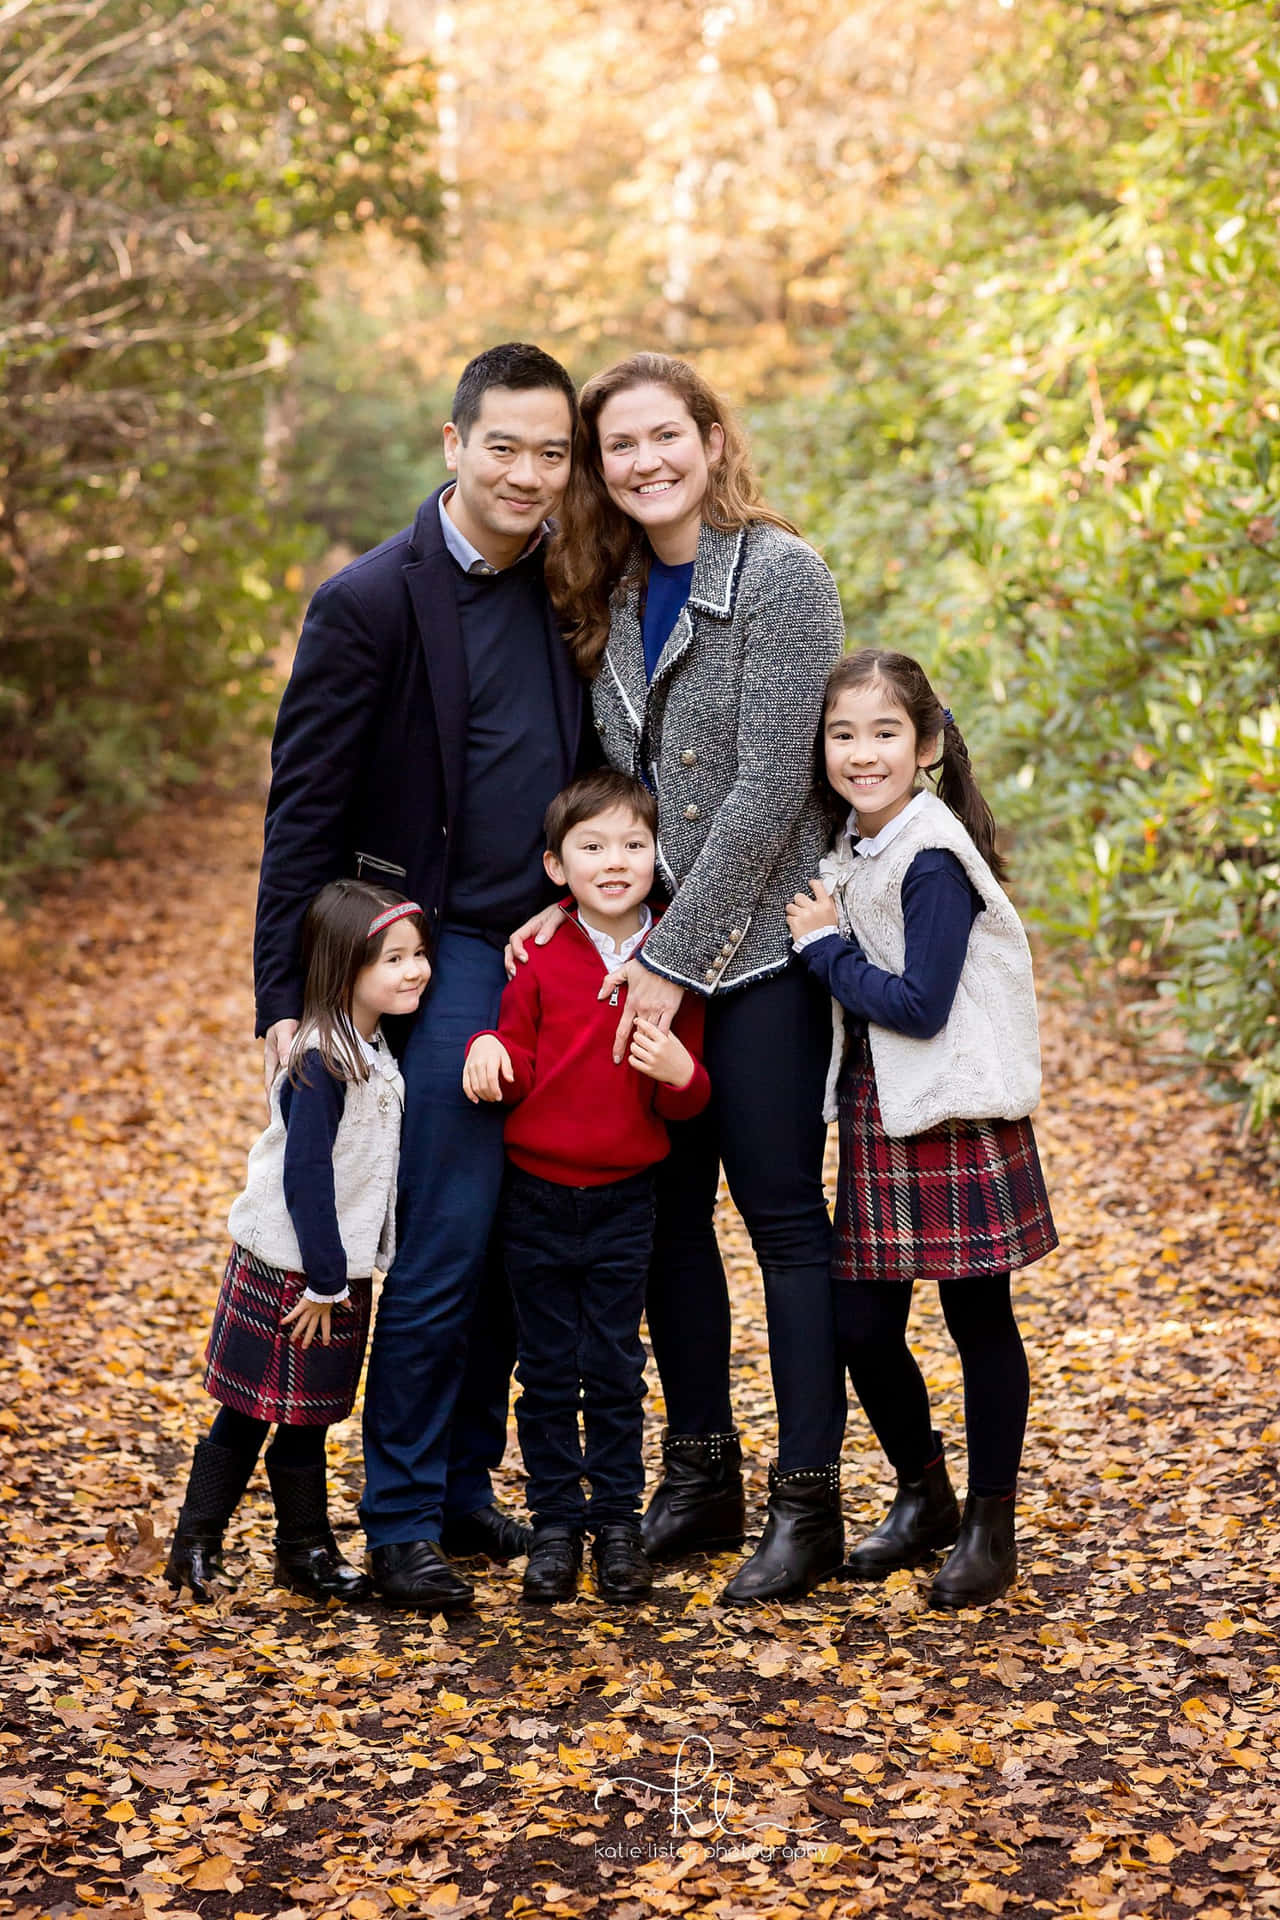 A Family Poses For A Photo In The Fall